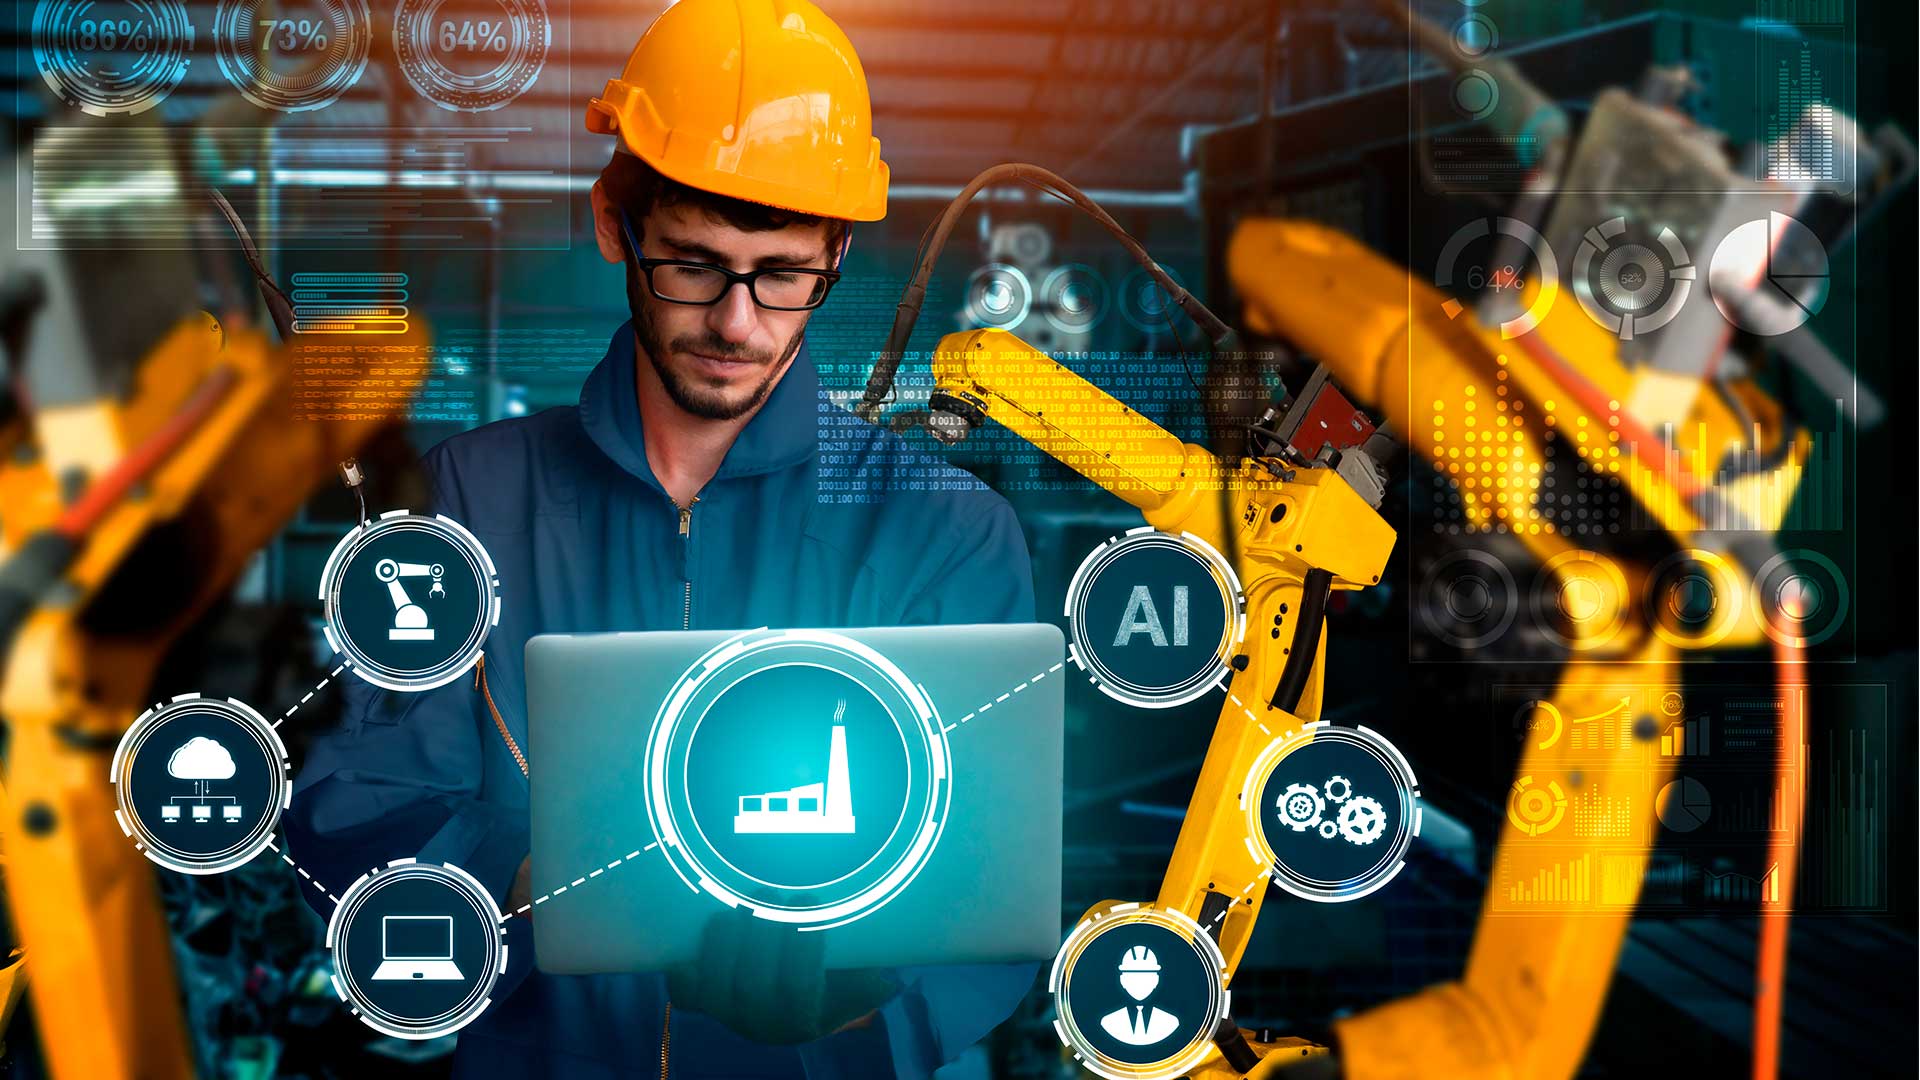 Industrial Maintenance in the Age of Industry 4.0